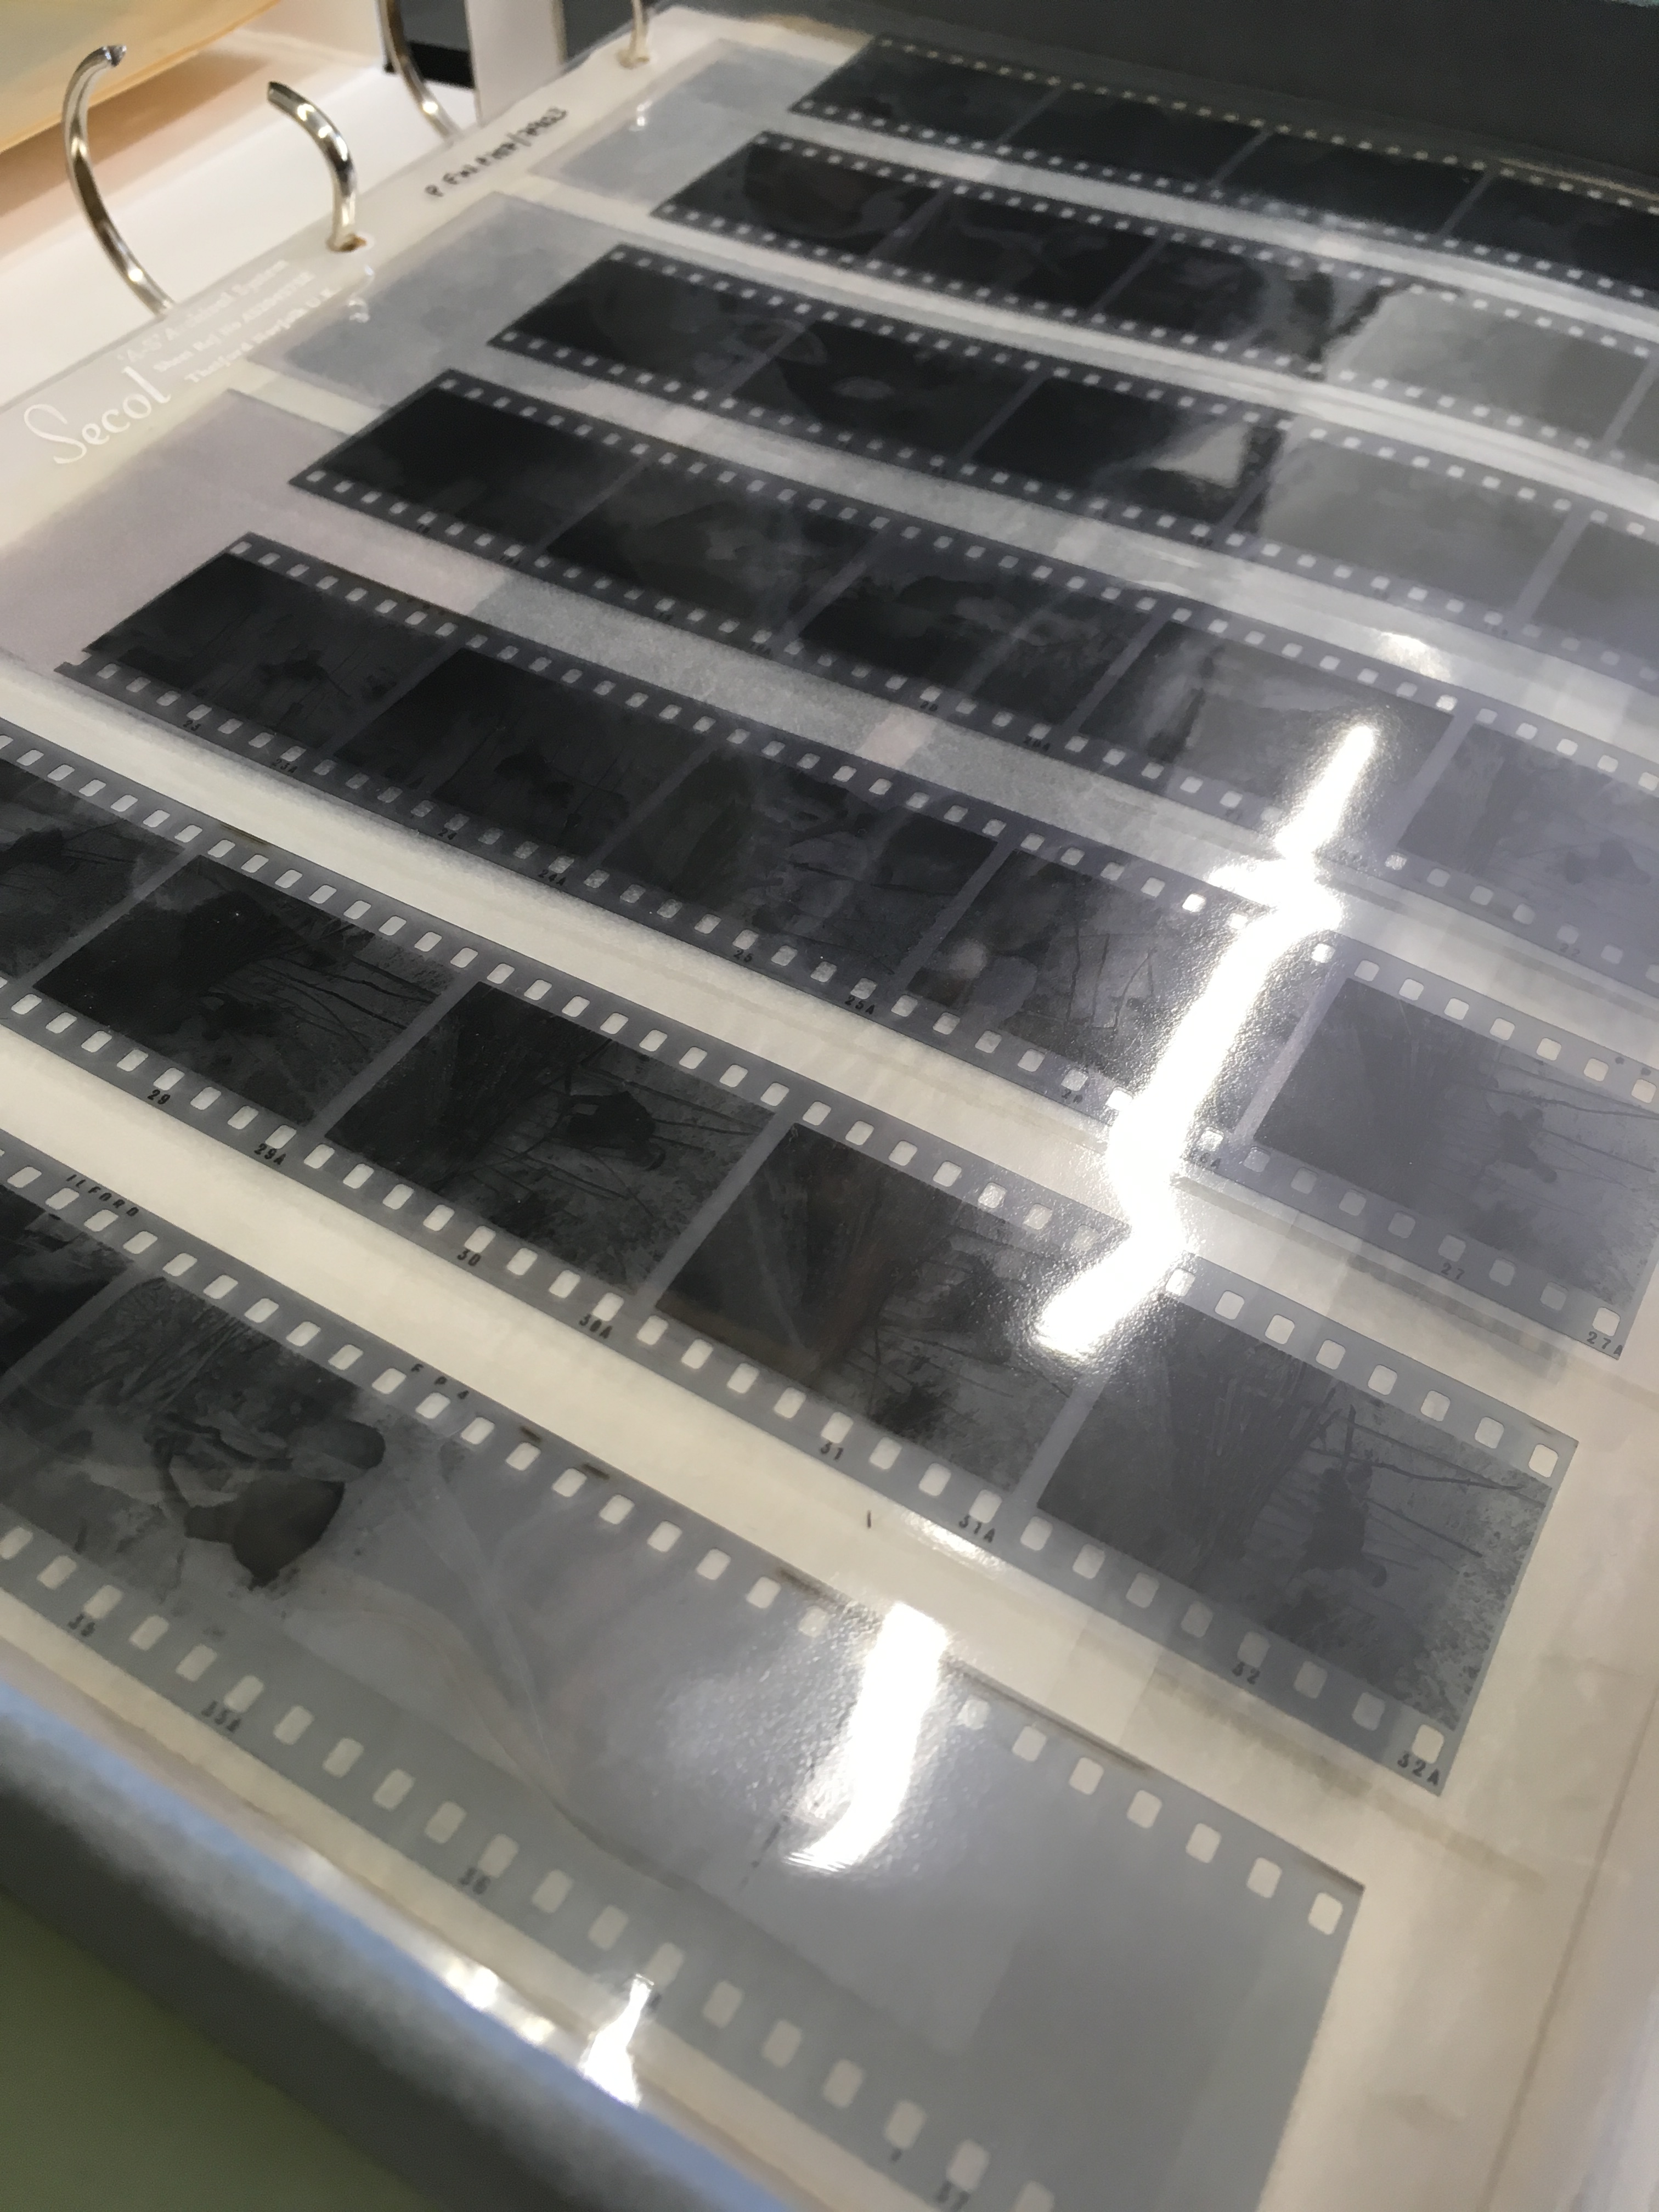 Image of 35mm photographic negatives in a plastic sleeve